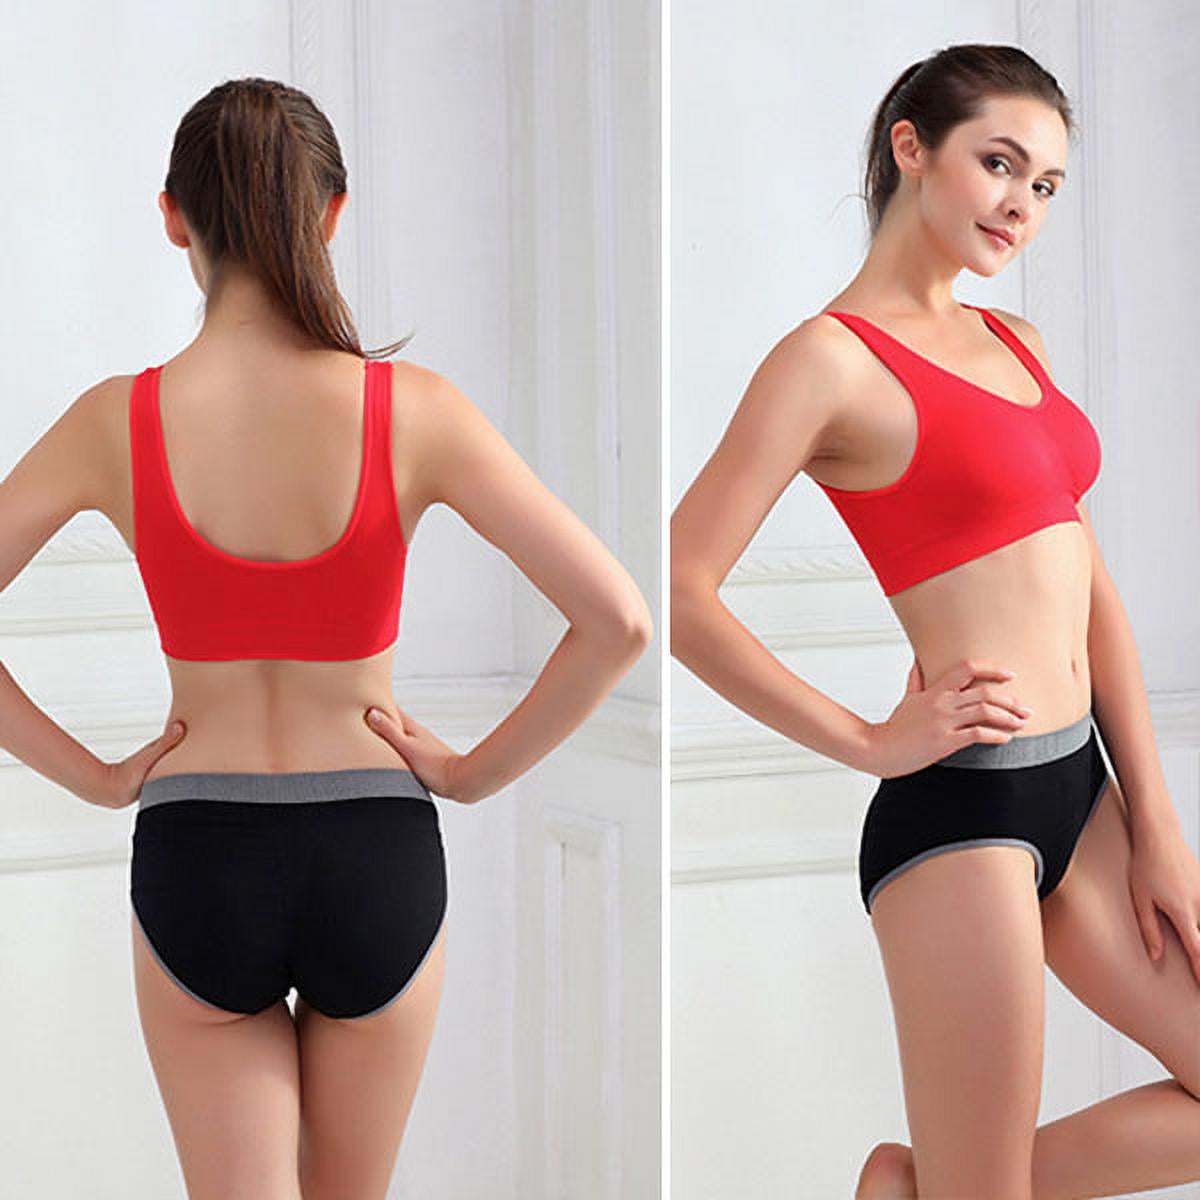 Women's Comfort Breathable Underwear Bra Seamless for Sports Yoga Running  Size S-3XL 